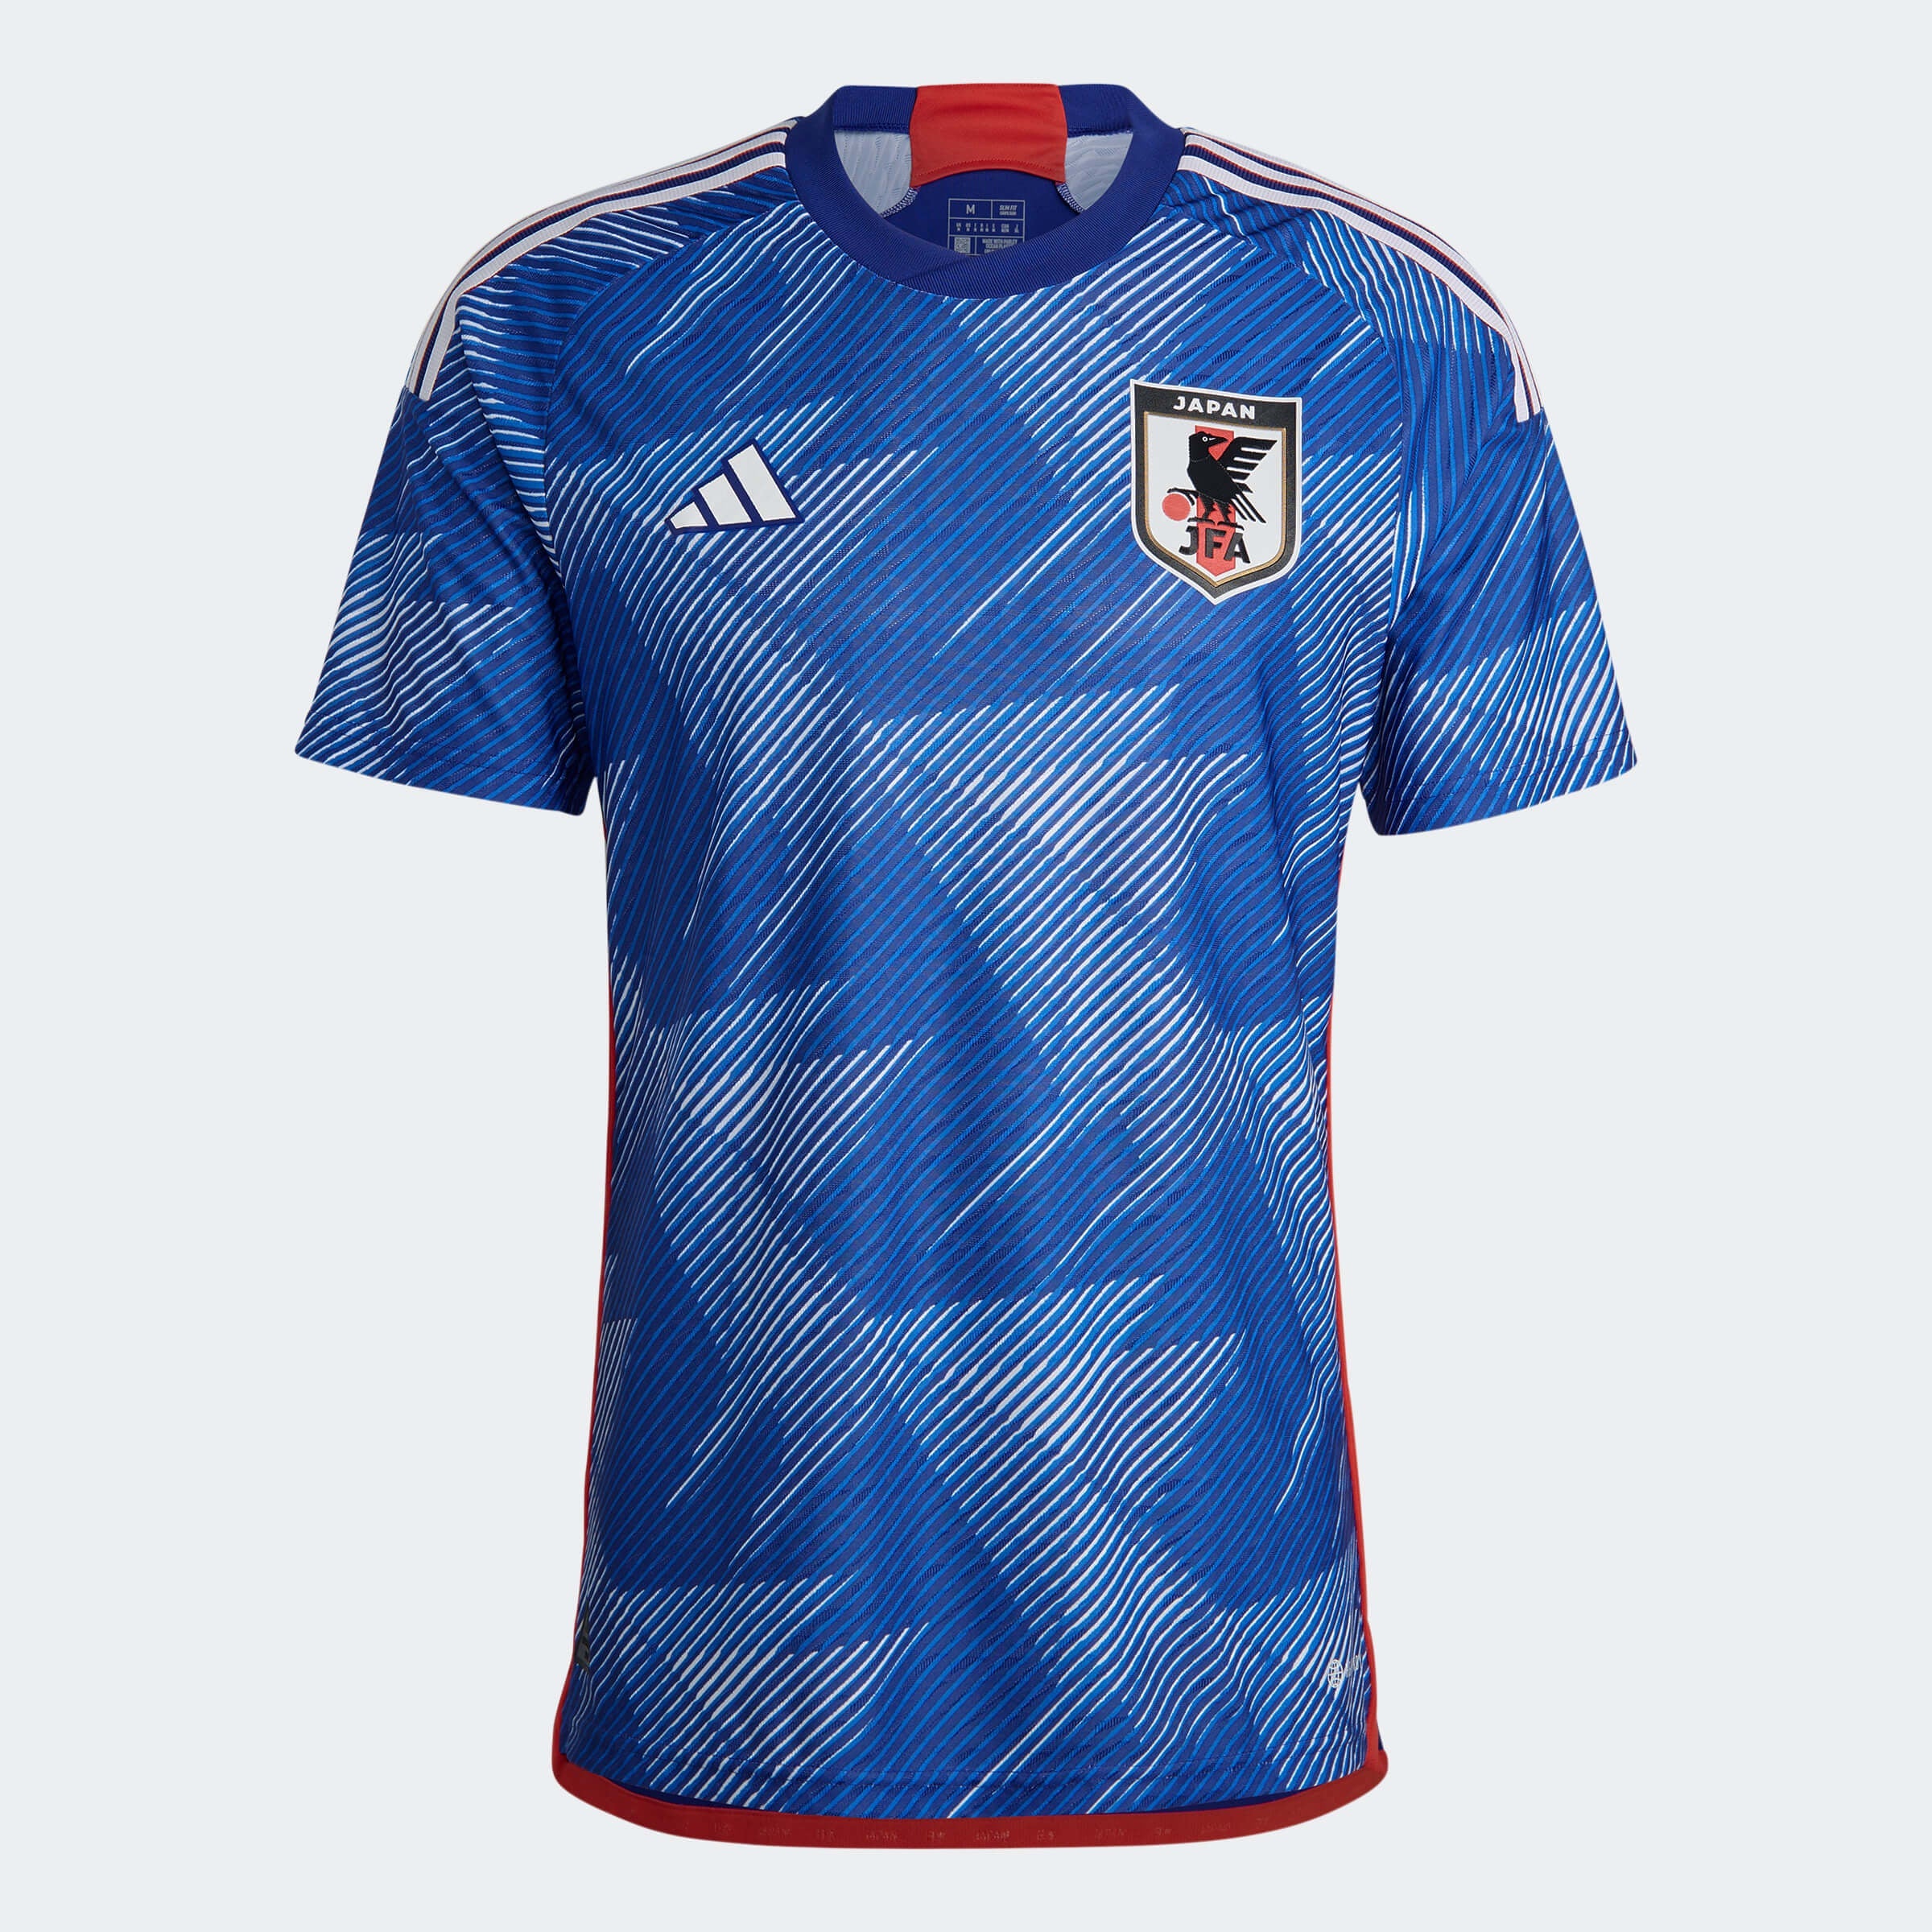 Adidas, Maglia adidas 2022-23 Giappone Home Authentic - Giappone Blu